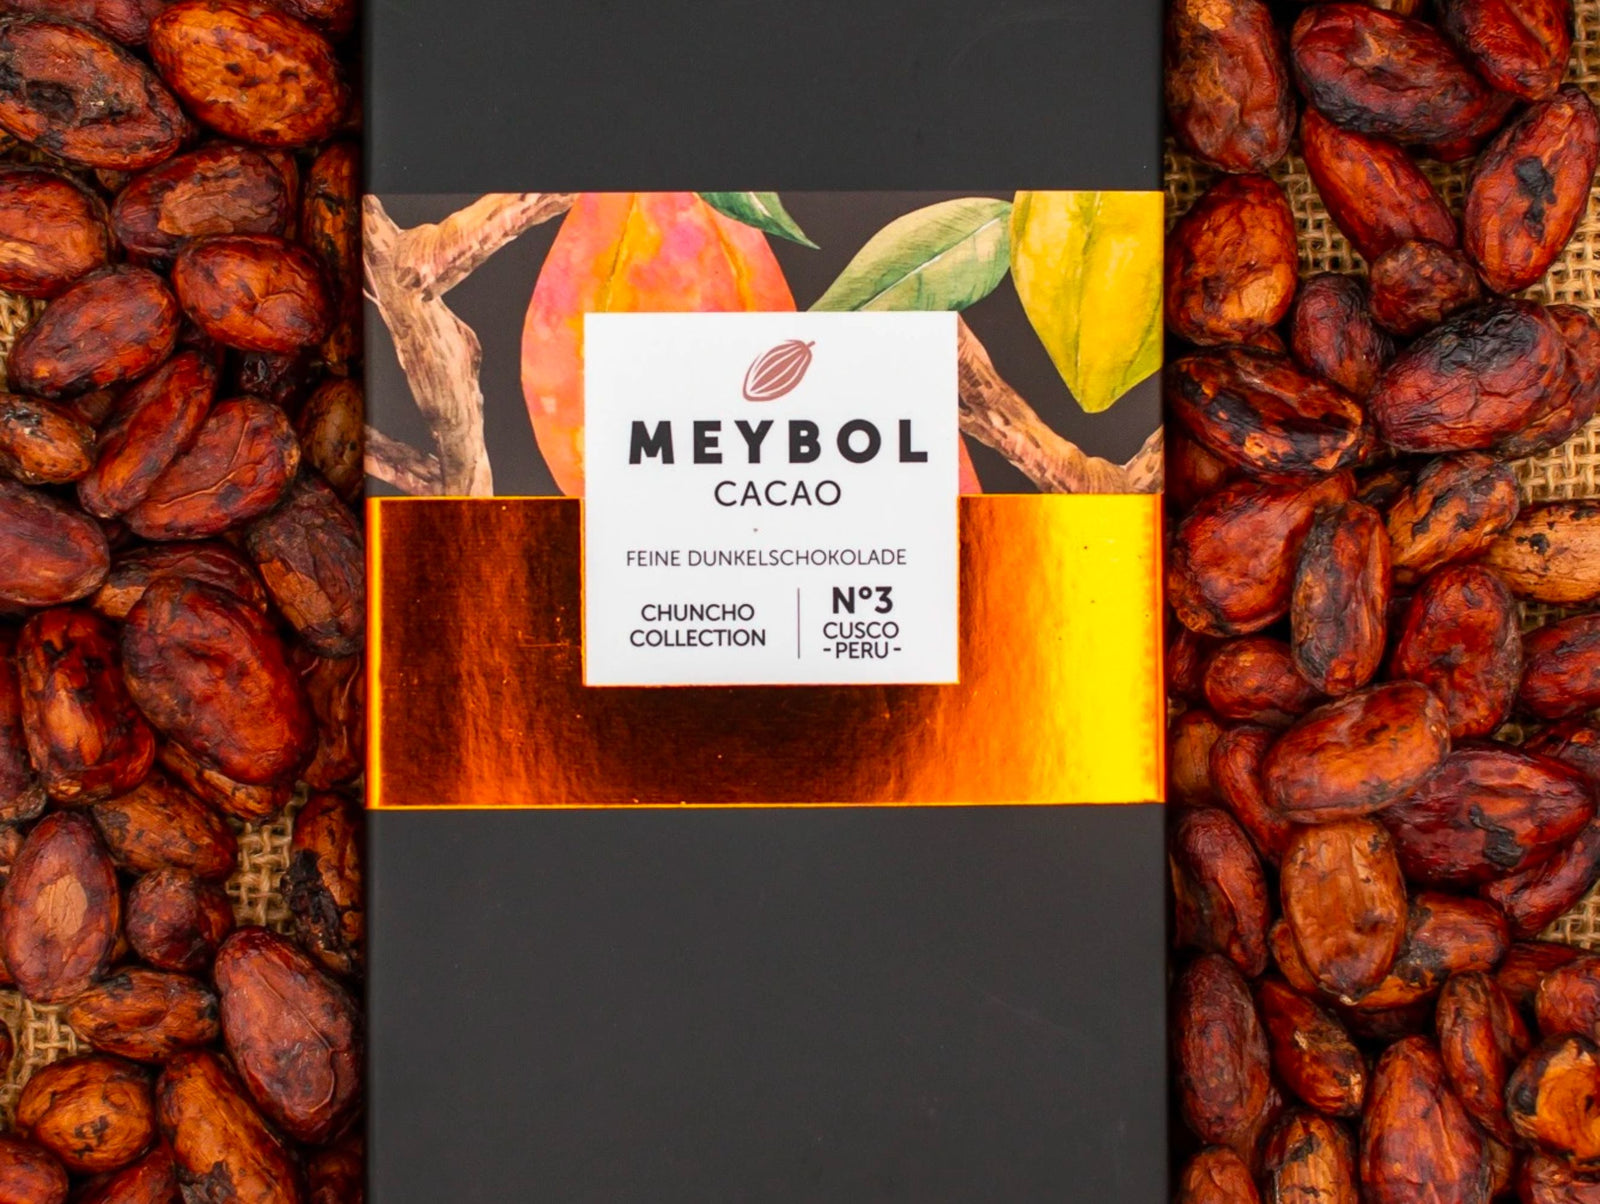 Meybol Cacao - Collection N3 | Best Chocolate in the World 2023